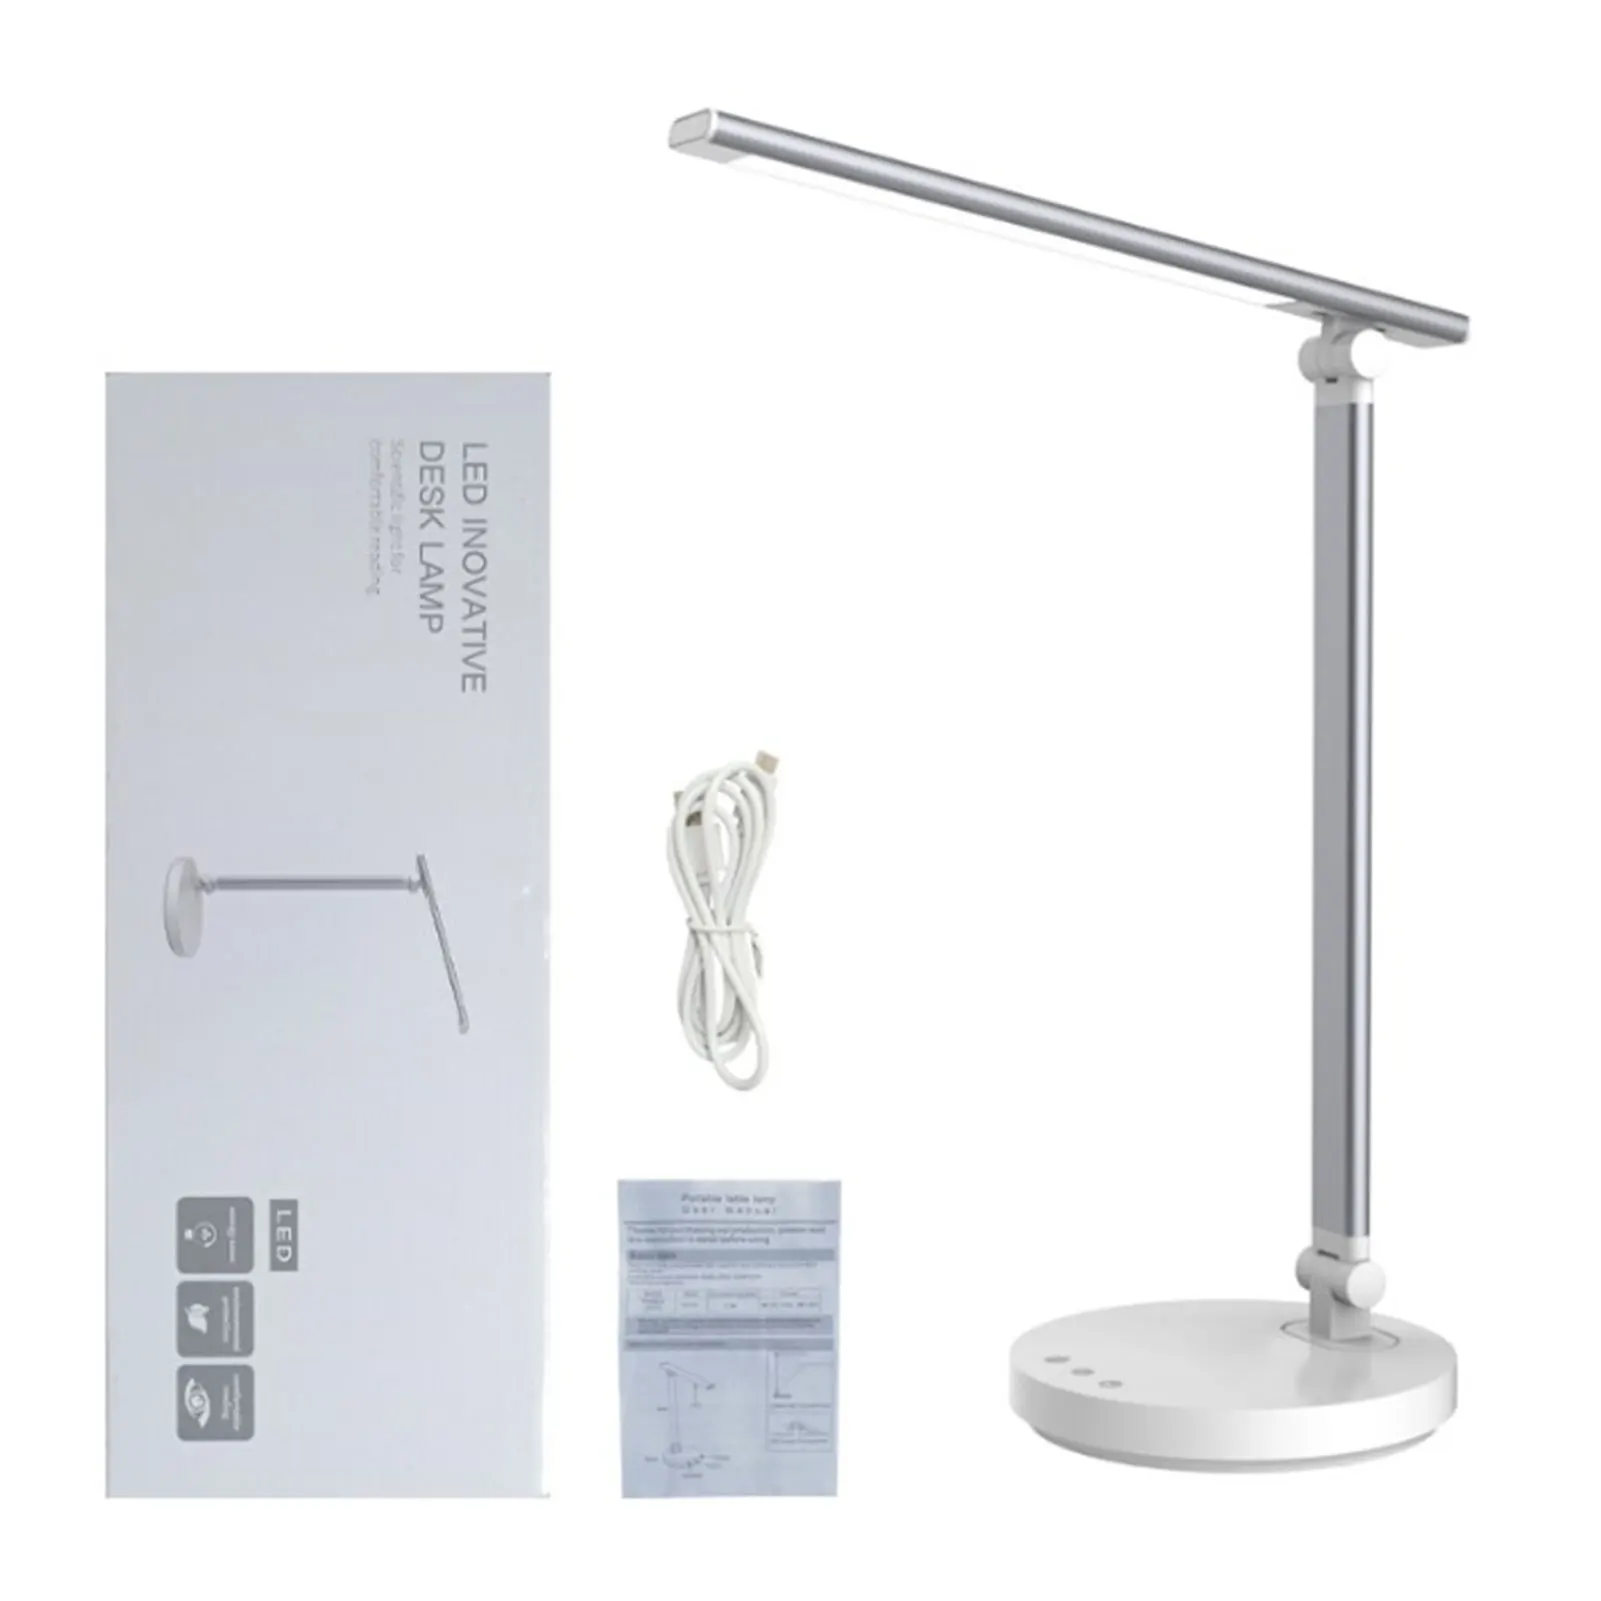 

Dimmable Led Studying Timer 5 Lighting Modes USB Powered Sleeping Kids Desk Lamp Office Eye Caring Touch Control Home